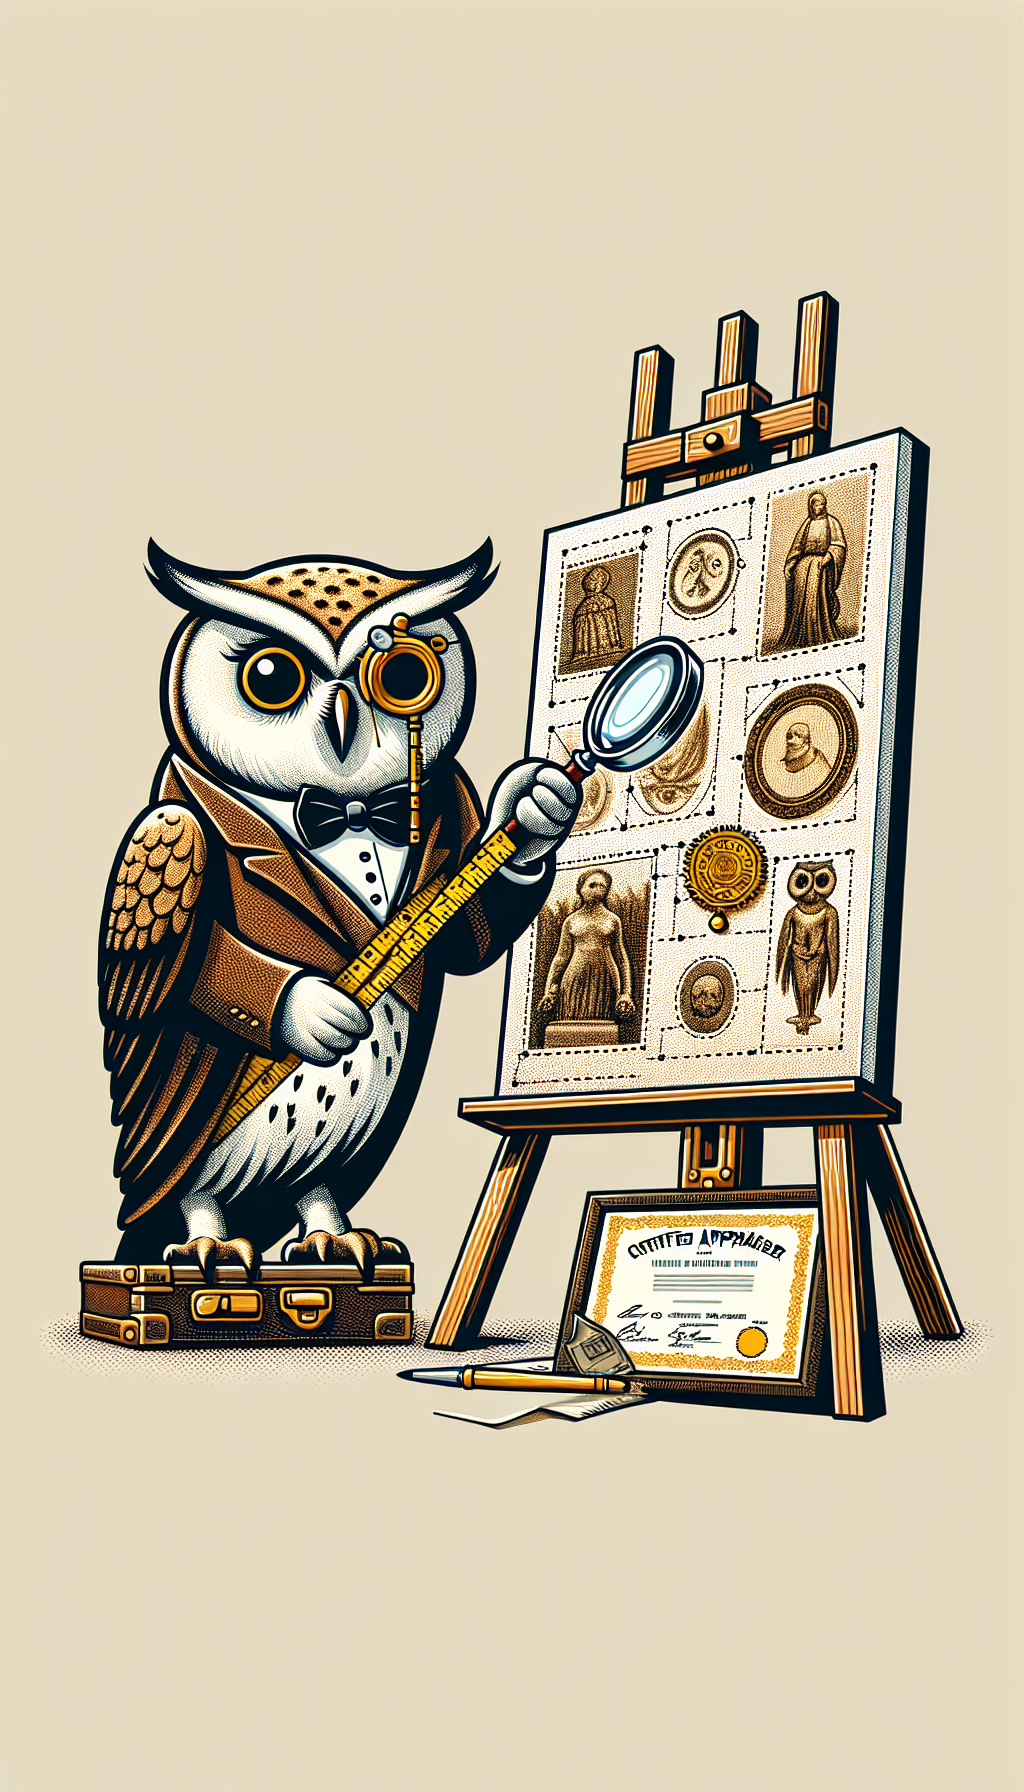 A meticulous owl, adorned with a monocle and a measuring tape, peruses a canvas on an easel that displays dotted outlines of famous art pieces. Above, a magnifying glass highlights the details, with a diploma and a golden seal that reads "Certified Appraiser Near You" shown prominently in the owl's wing, symbolizing precision, expertise, and accessibility in art valuation.